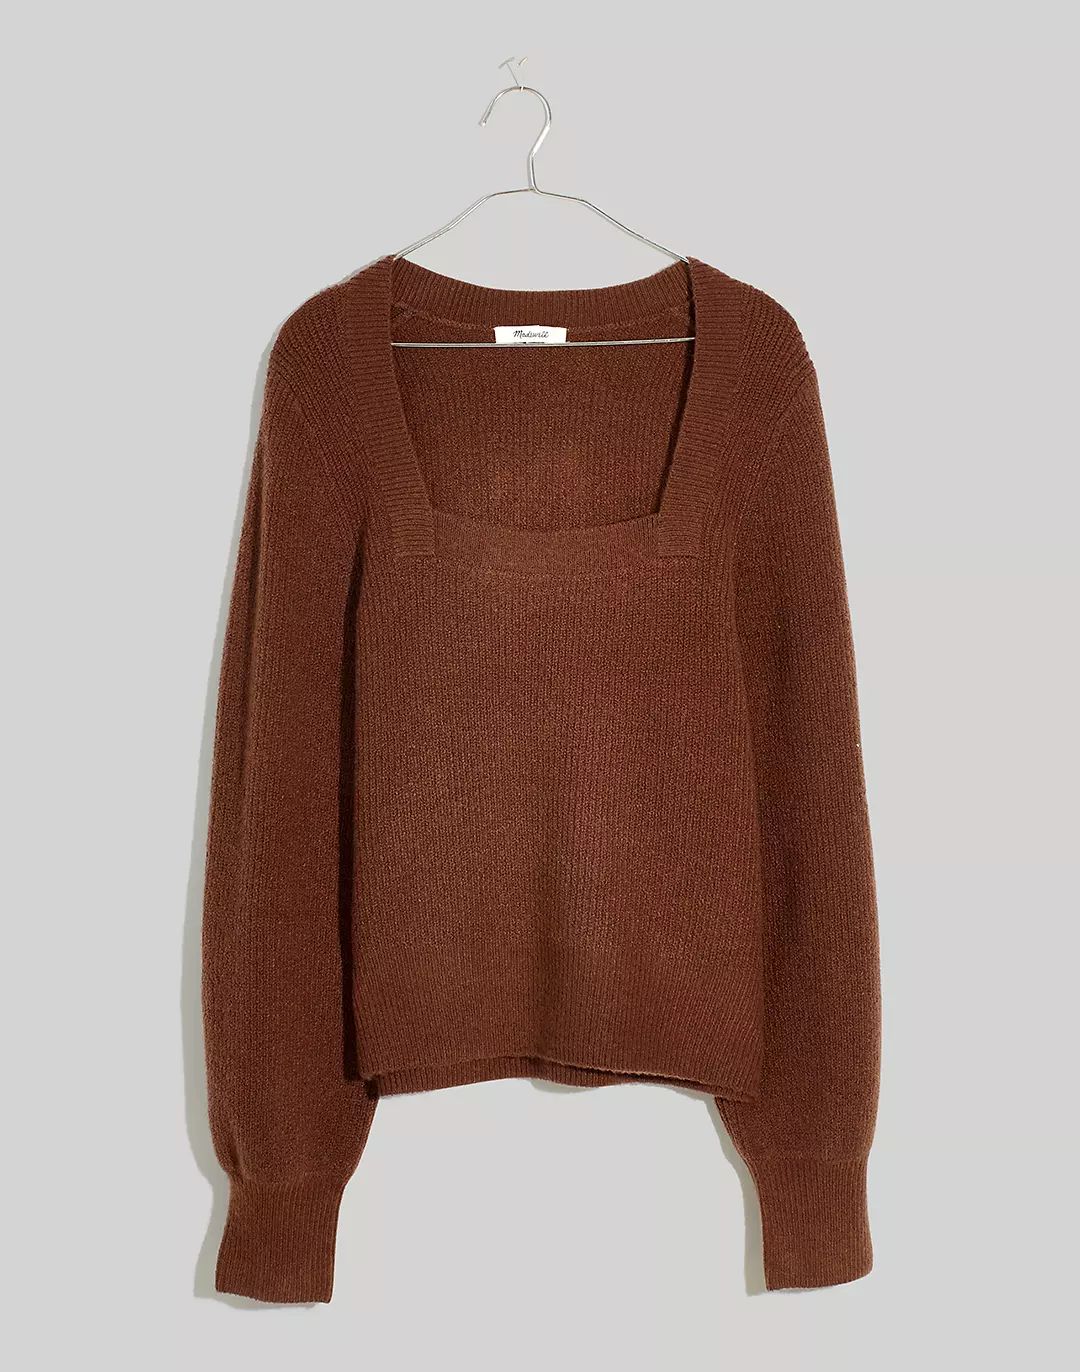 Melwood Square-Neck Sweater in Coziest Yarn | Madewell